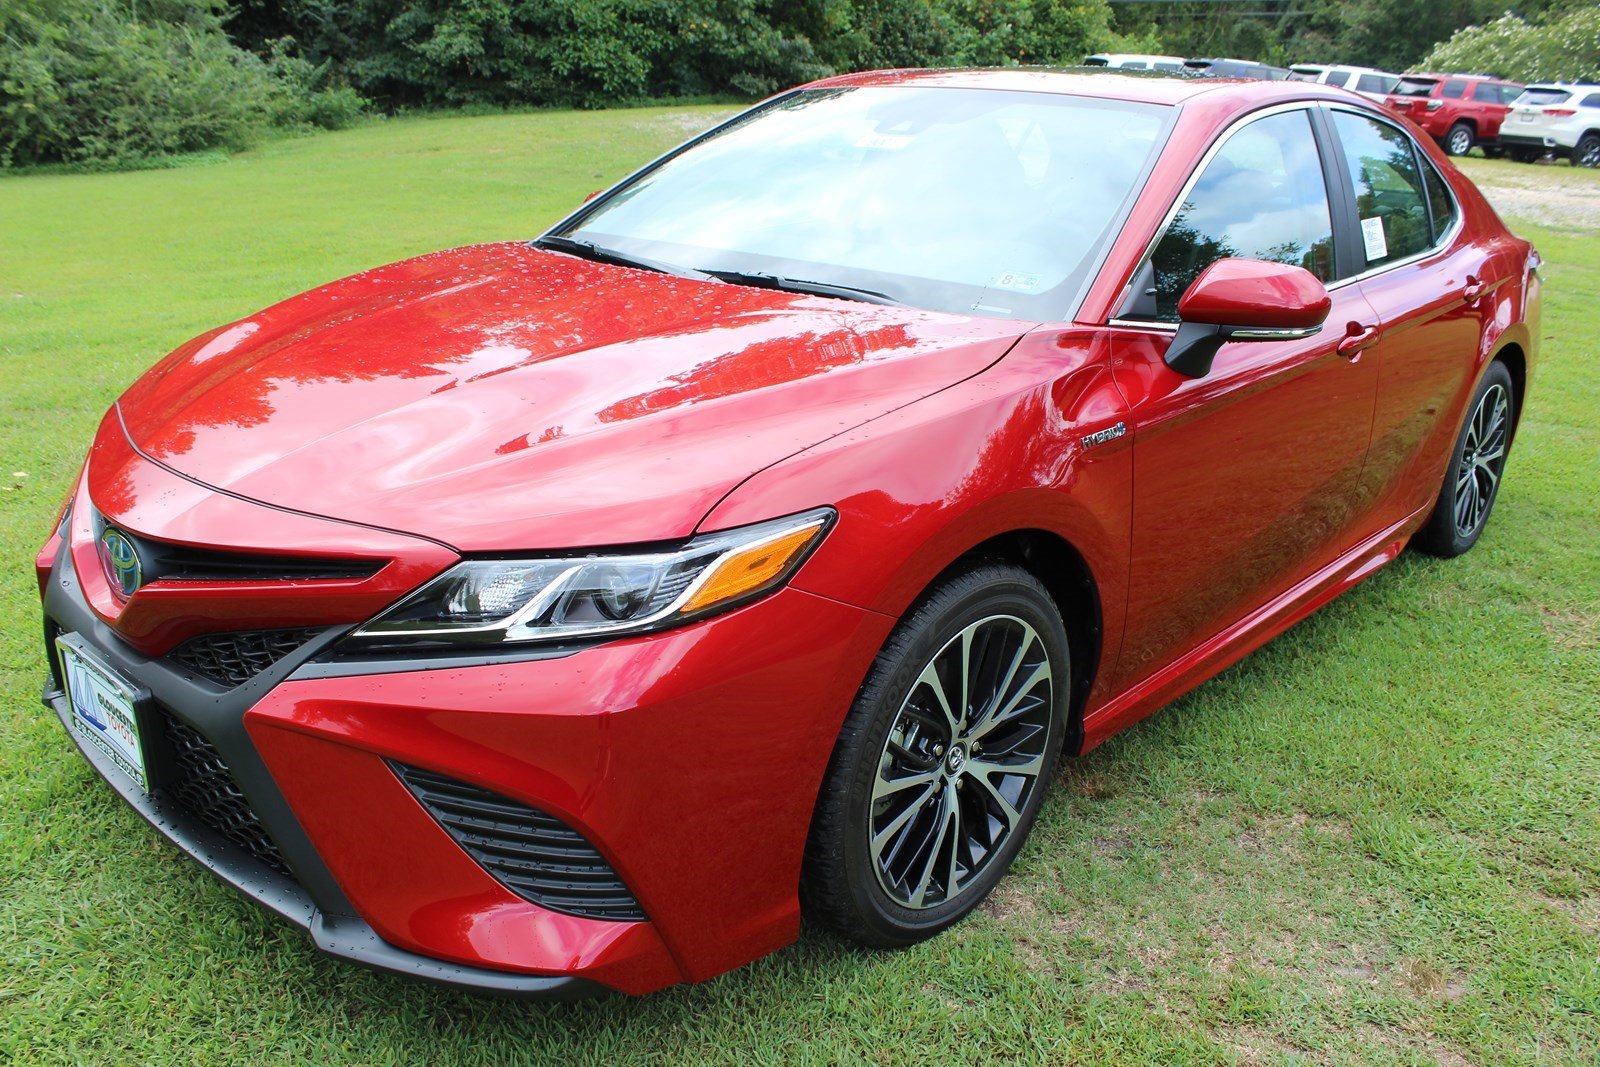 2019 Toyota Camry - Photos All Recommendation